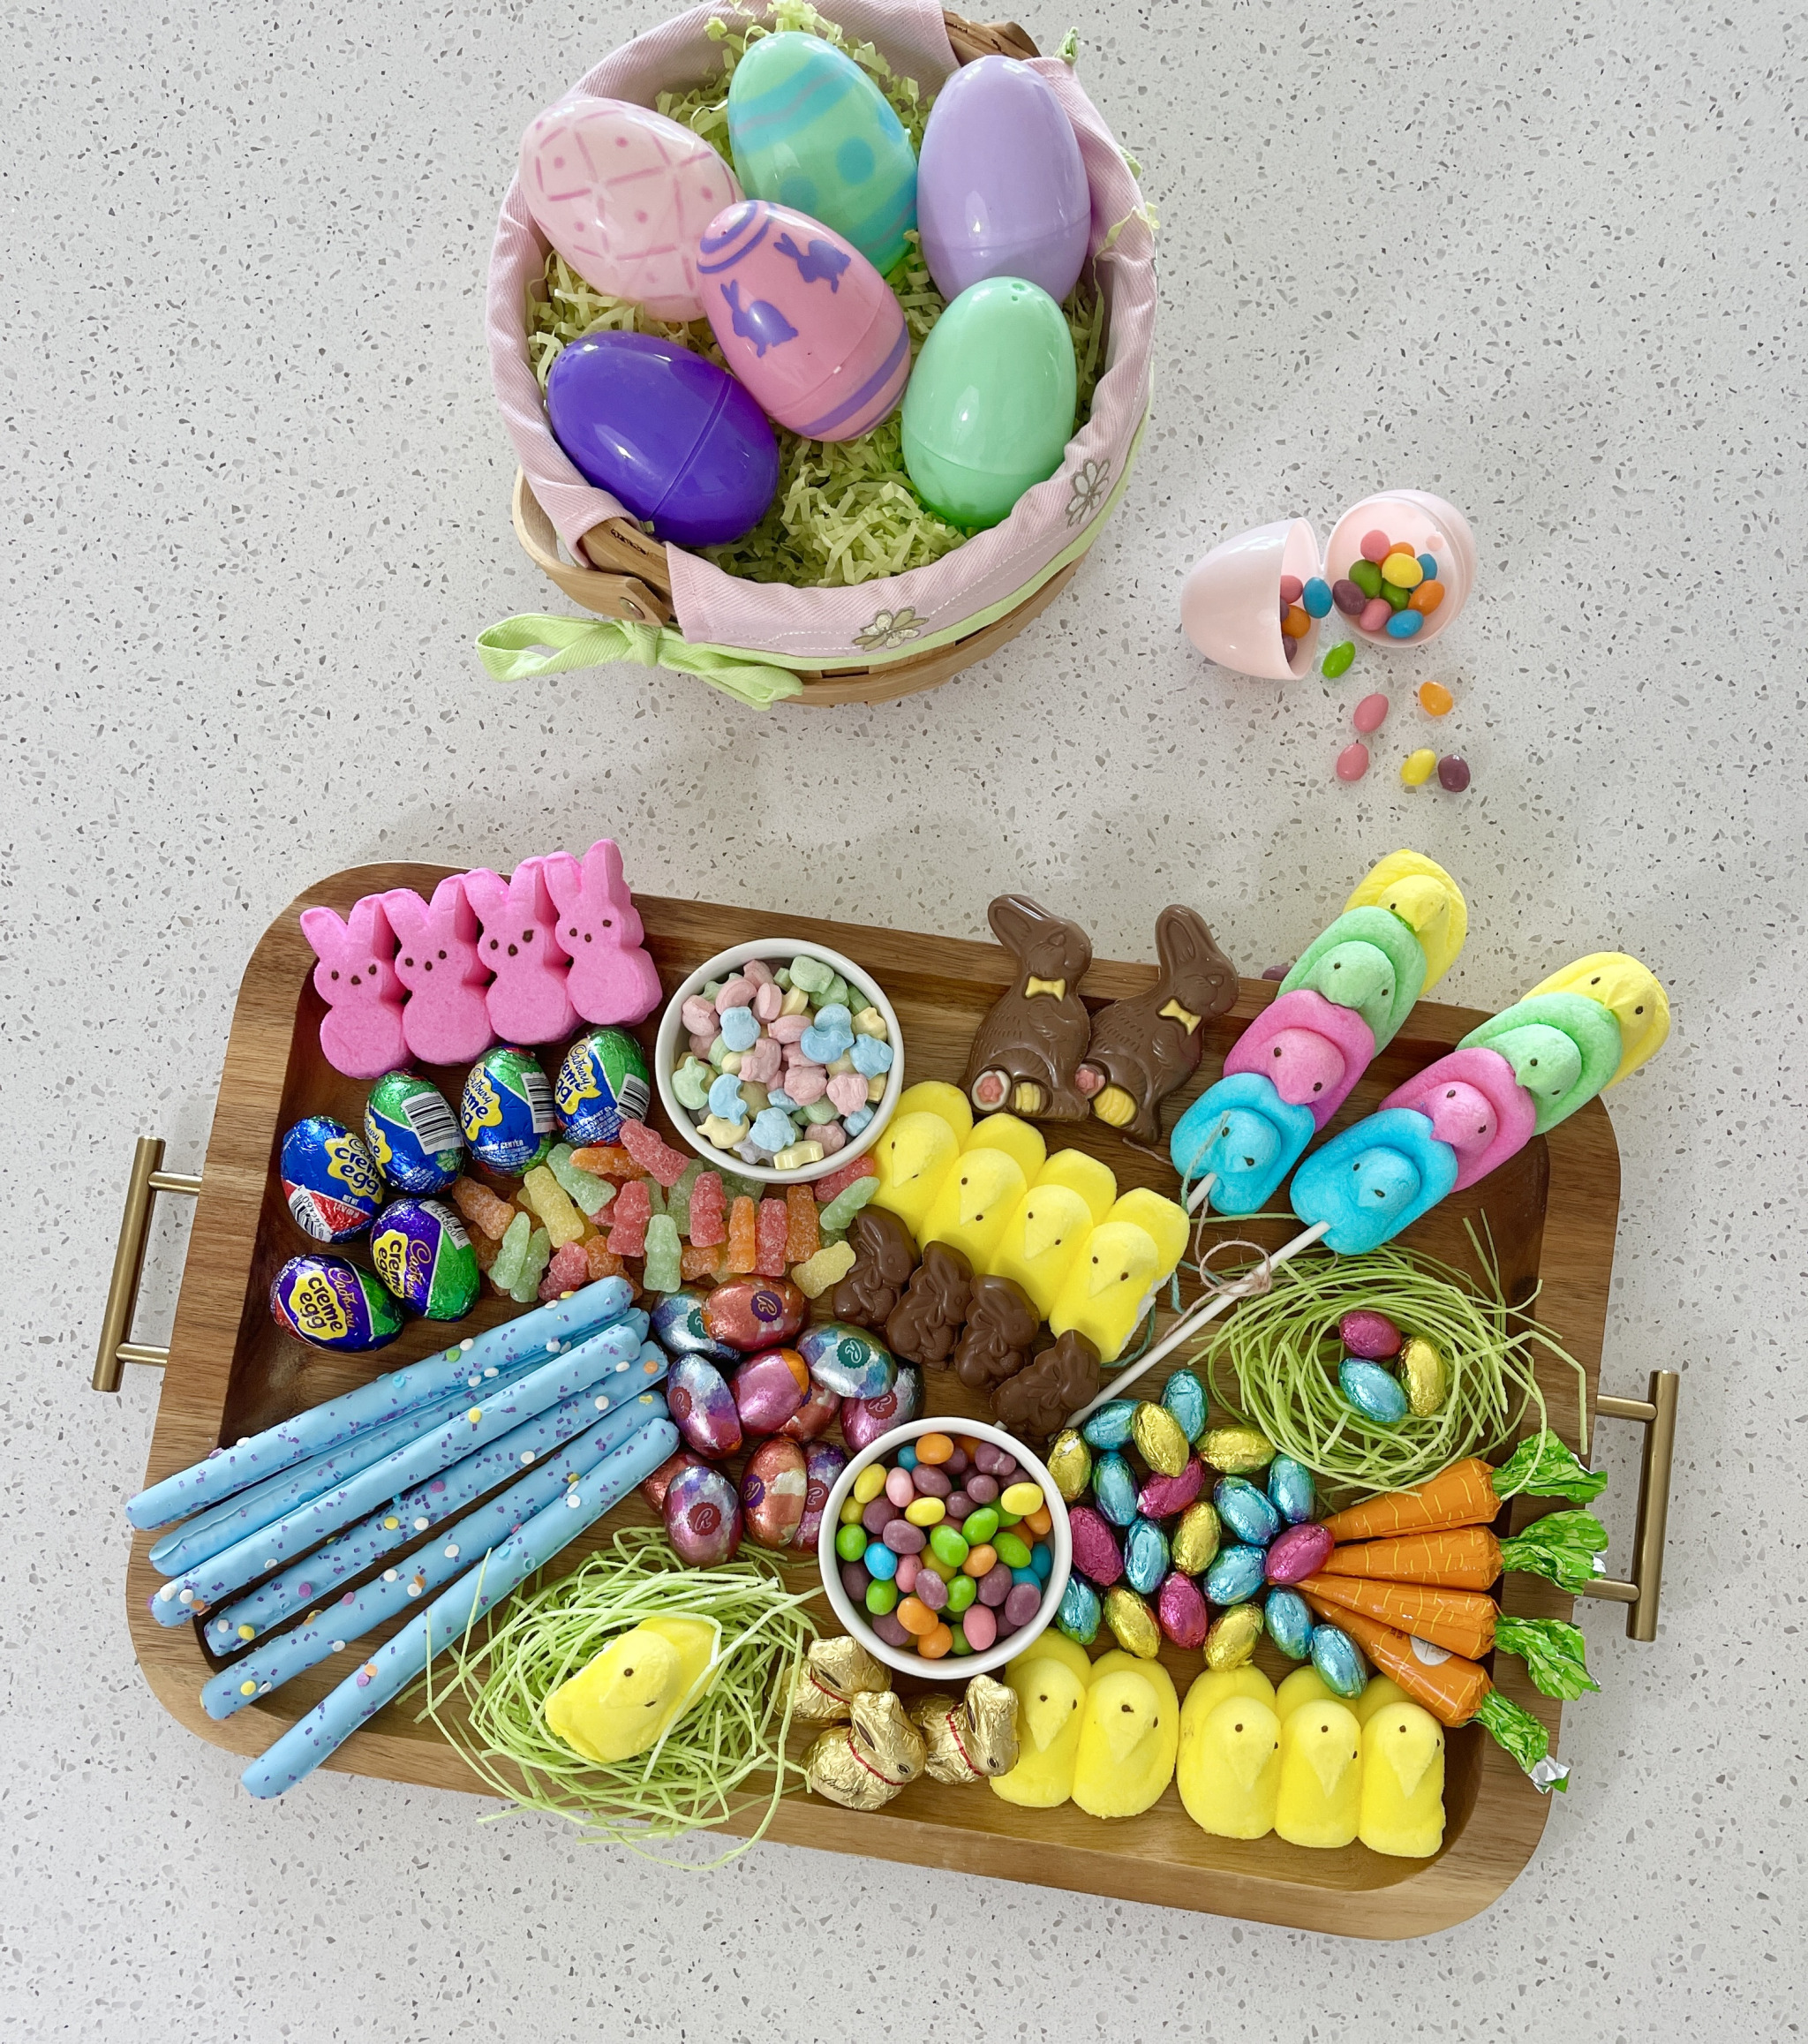 Tips for an easy Easter candy platter